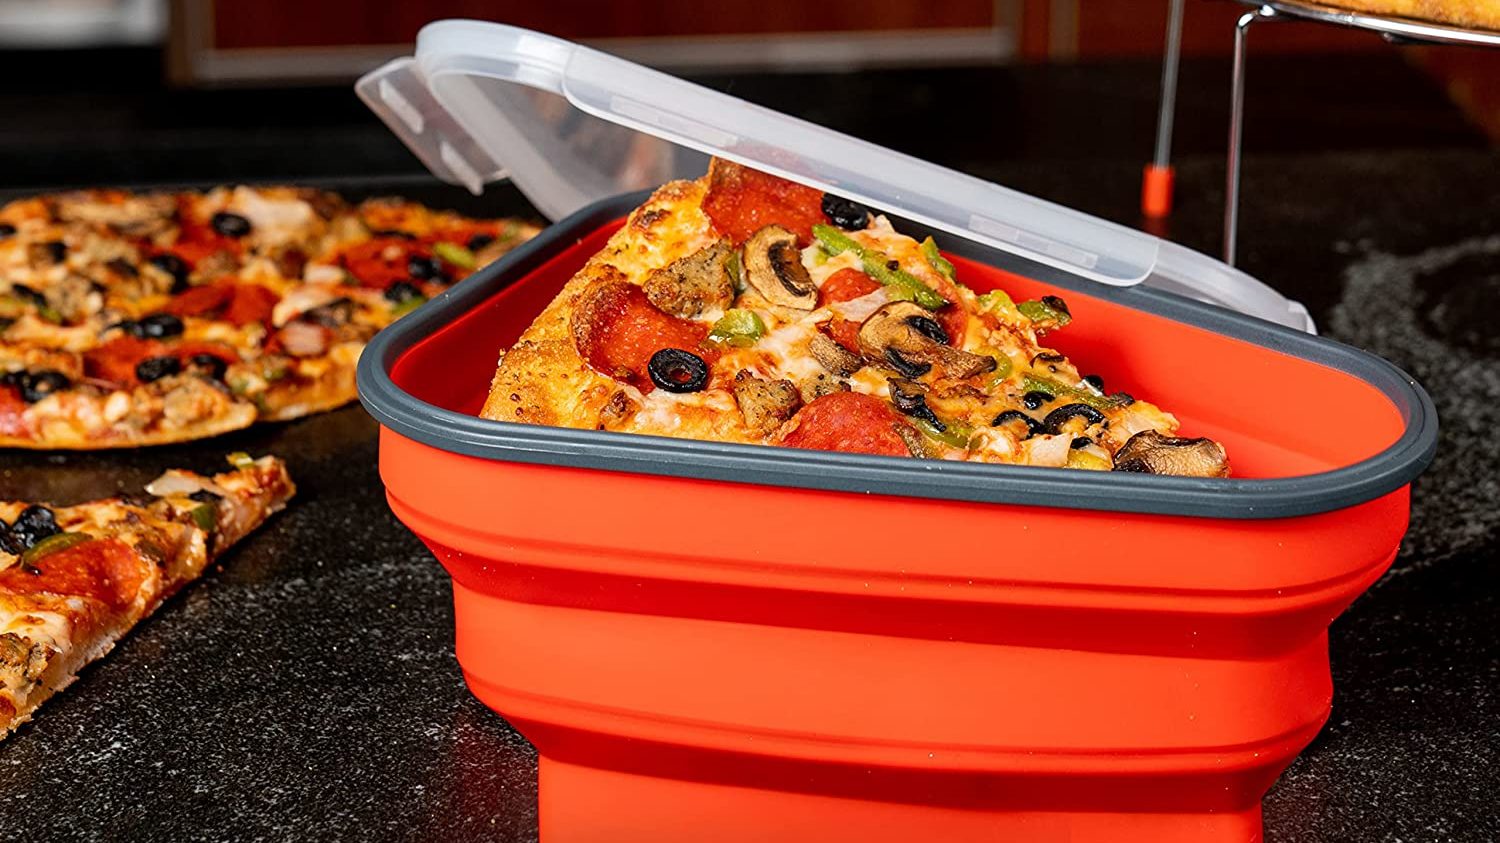 ProKitchen: Pizza Keep, Collapsible Pizza Container in 2023